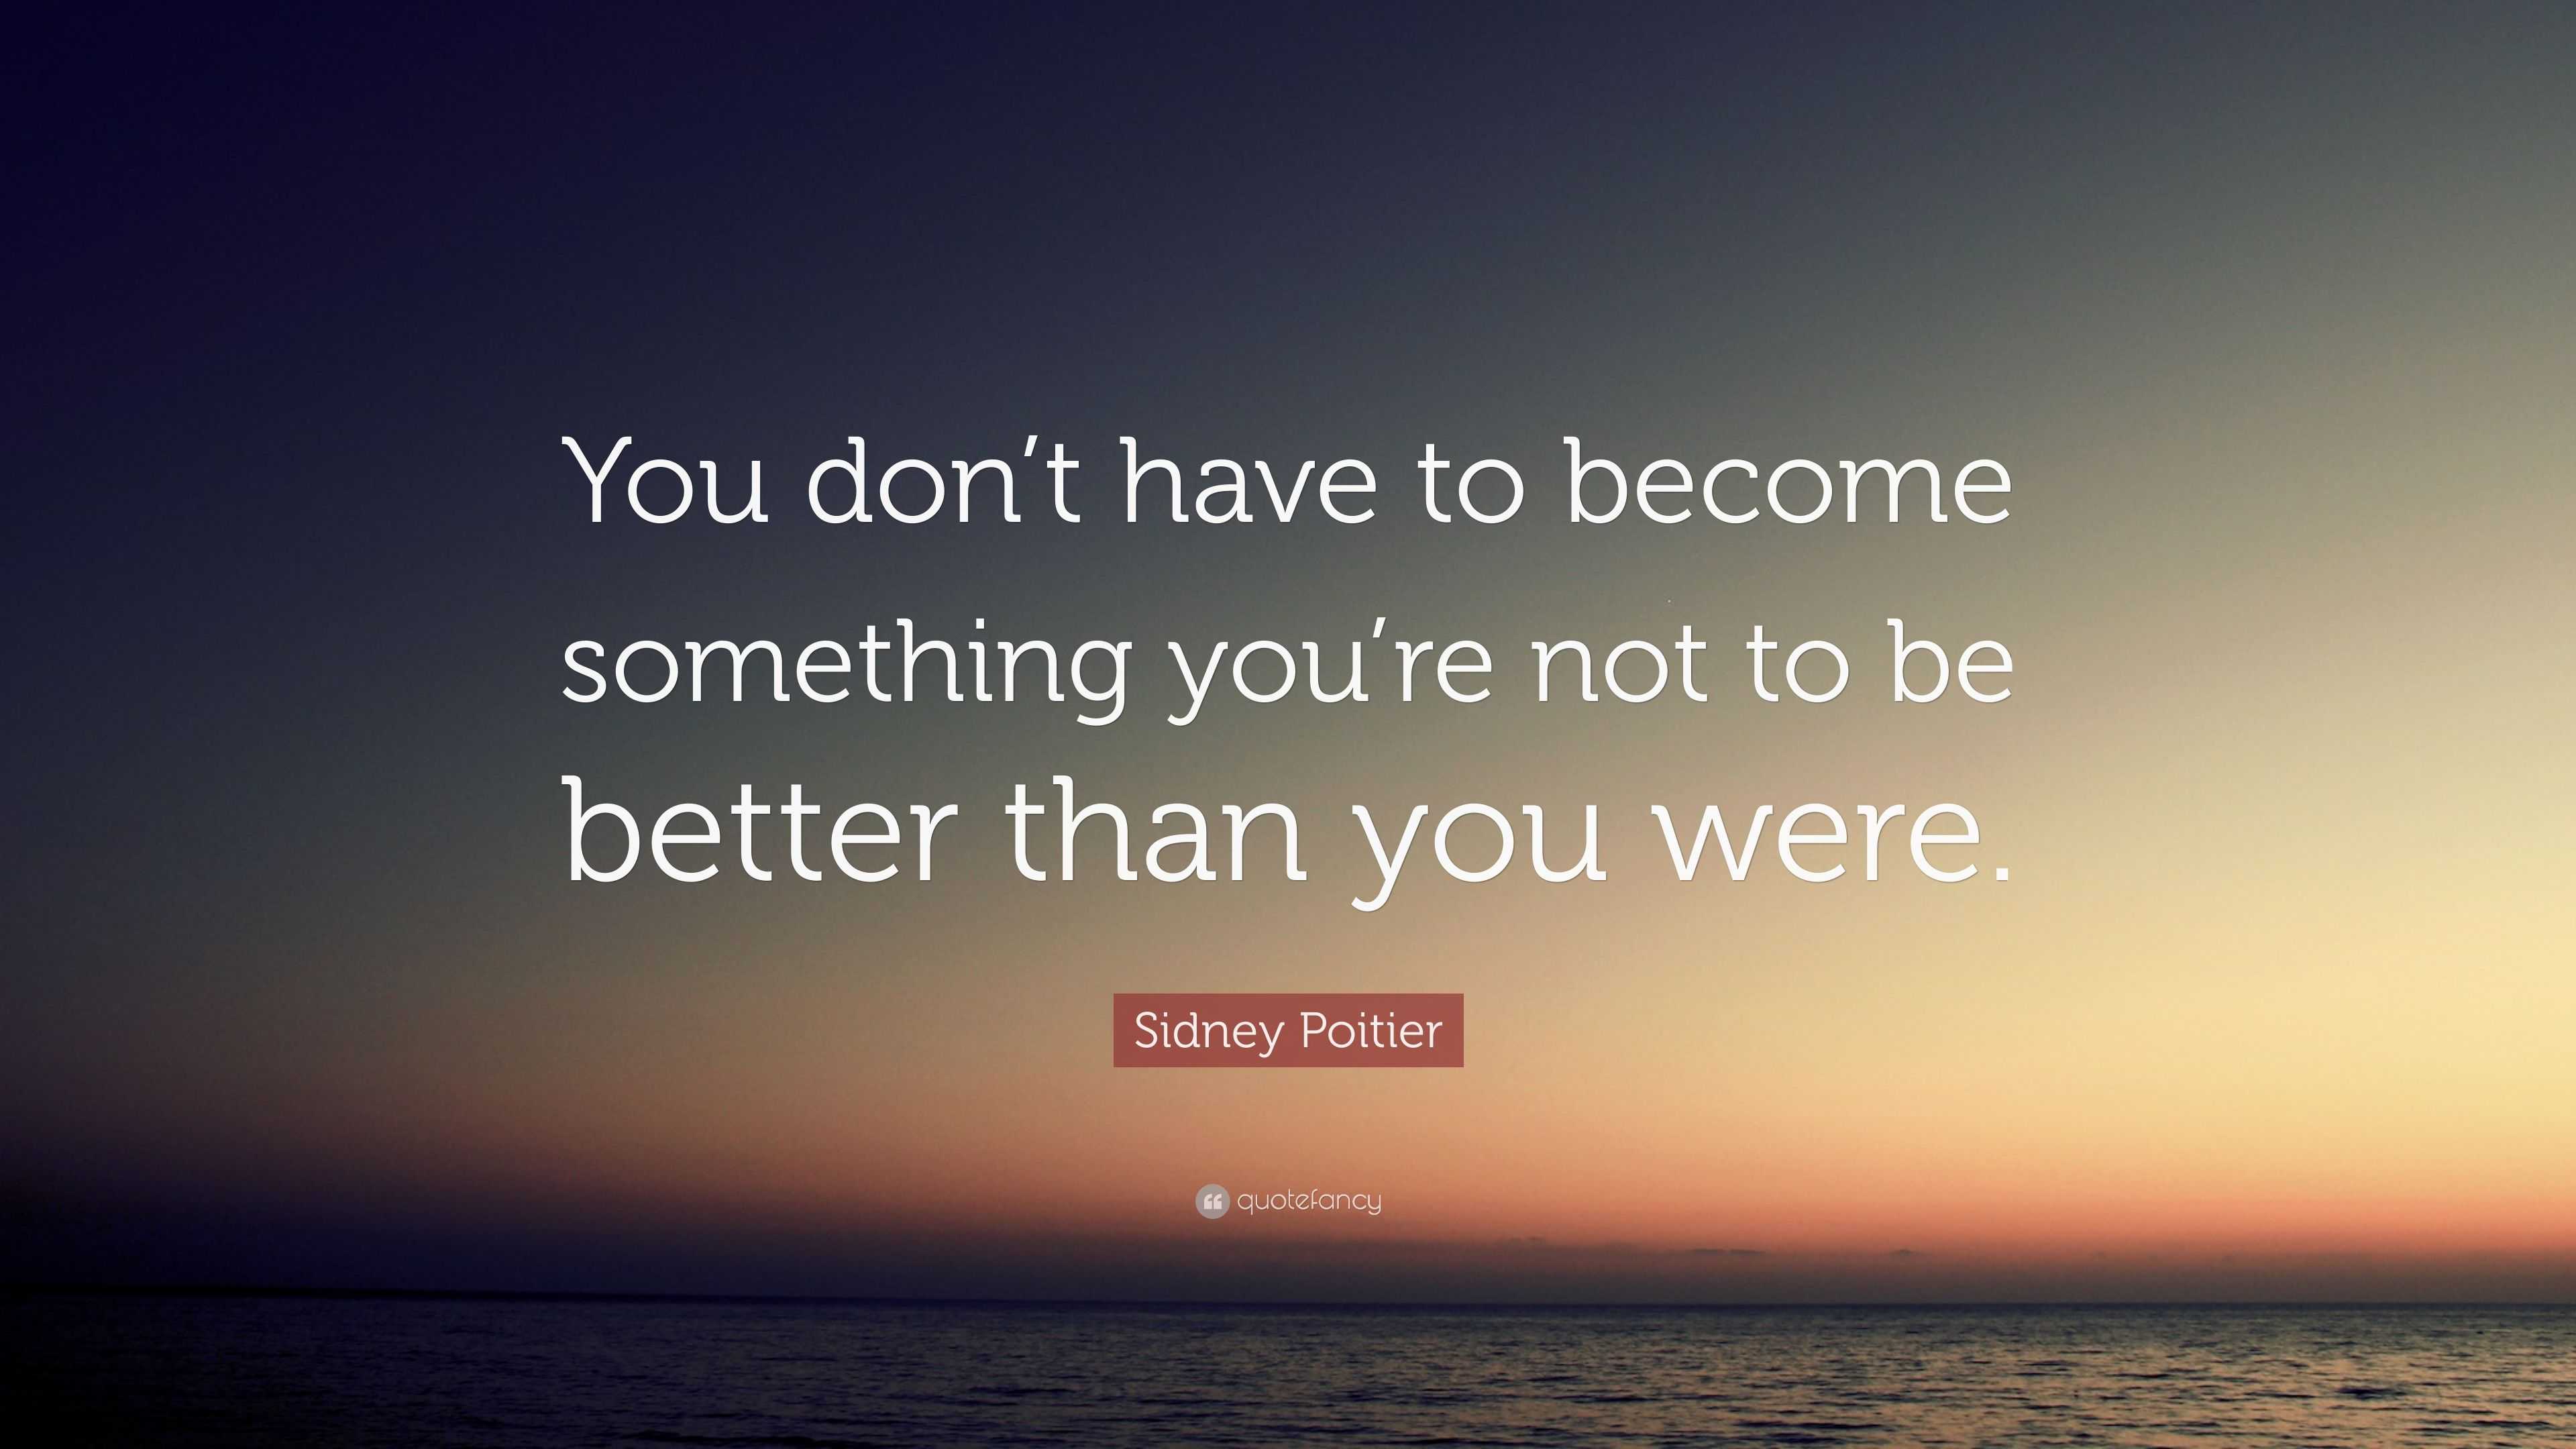 Sidney Poitier Quote: “You don’t have to become something you’re not to ...